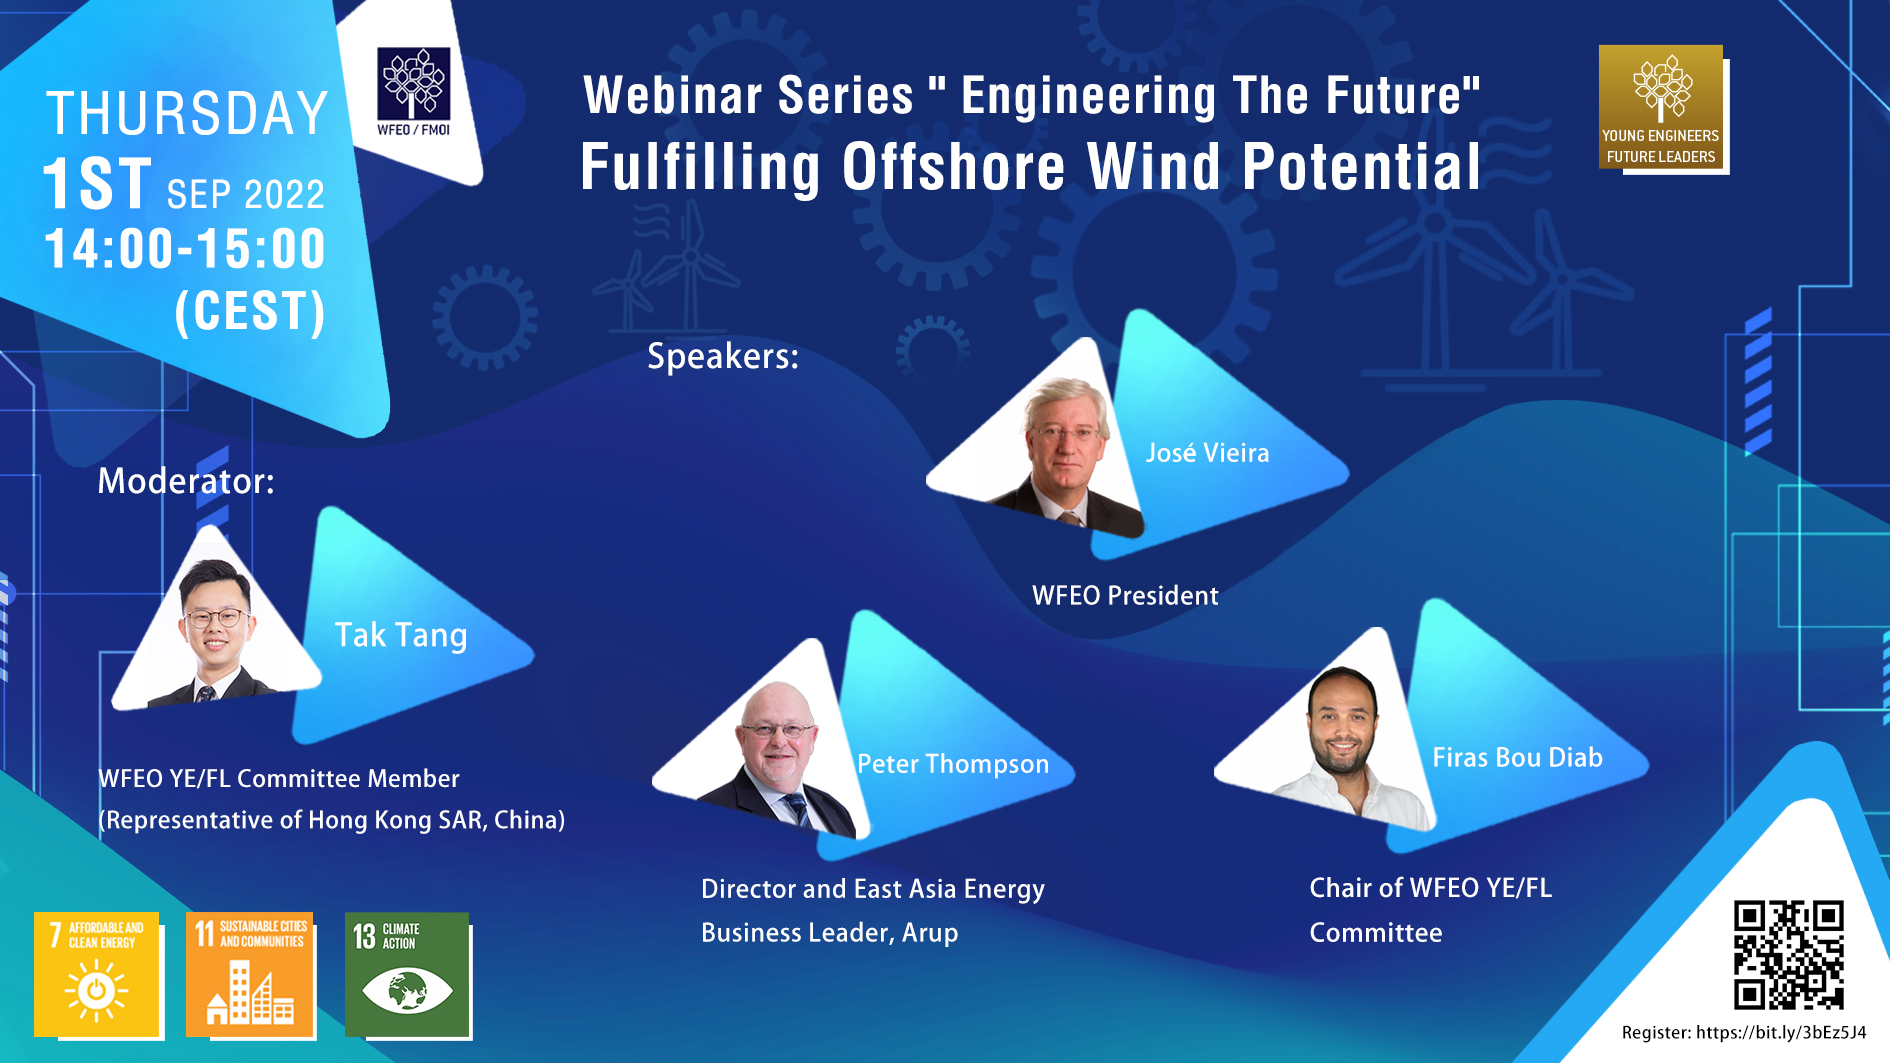 WFEO YEFL Webinar series “Engineering the Future – Fulfilling Offshore Wind Potential”